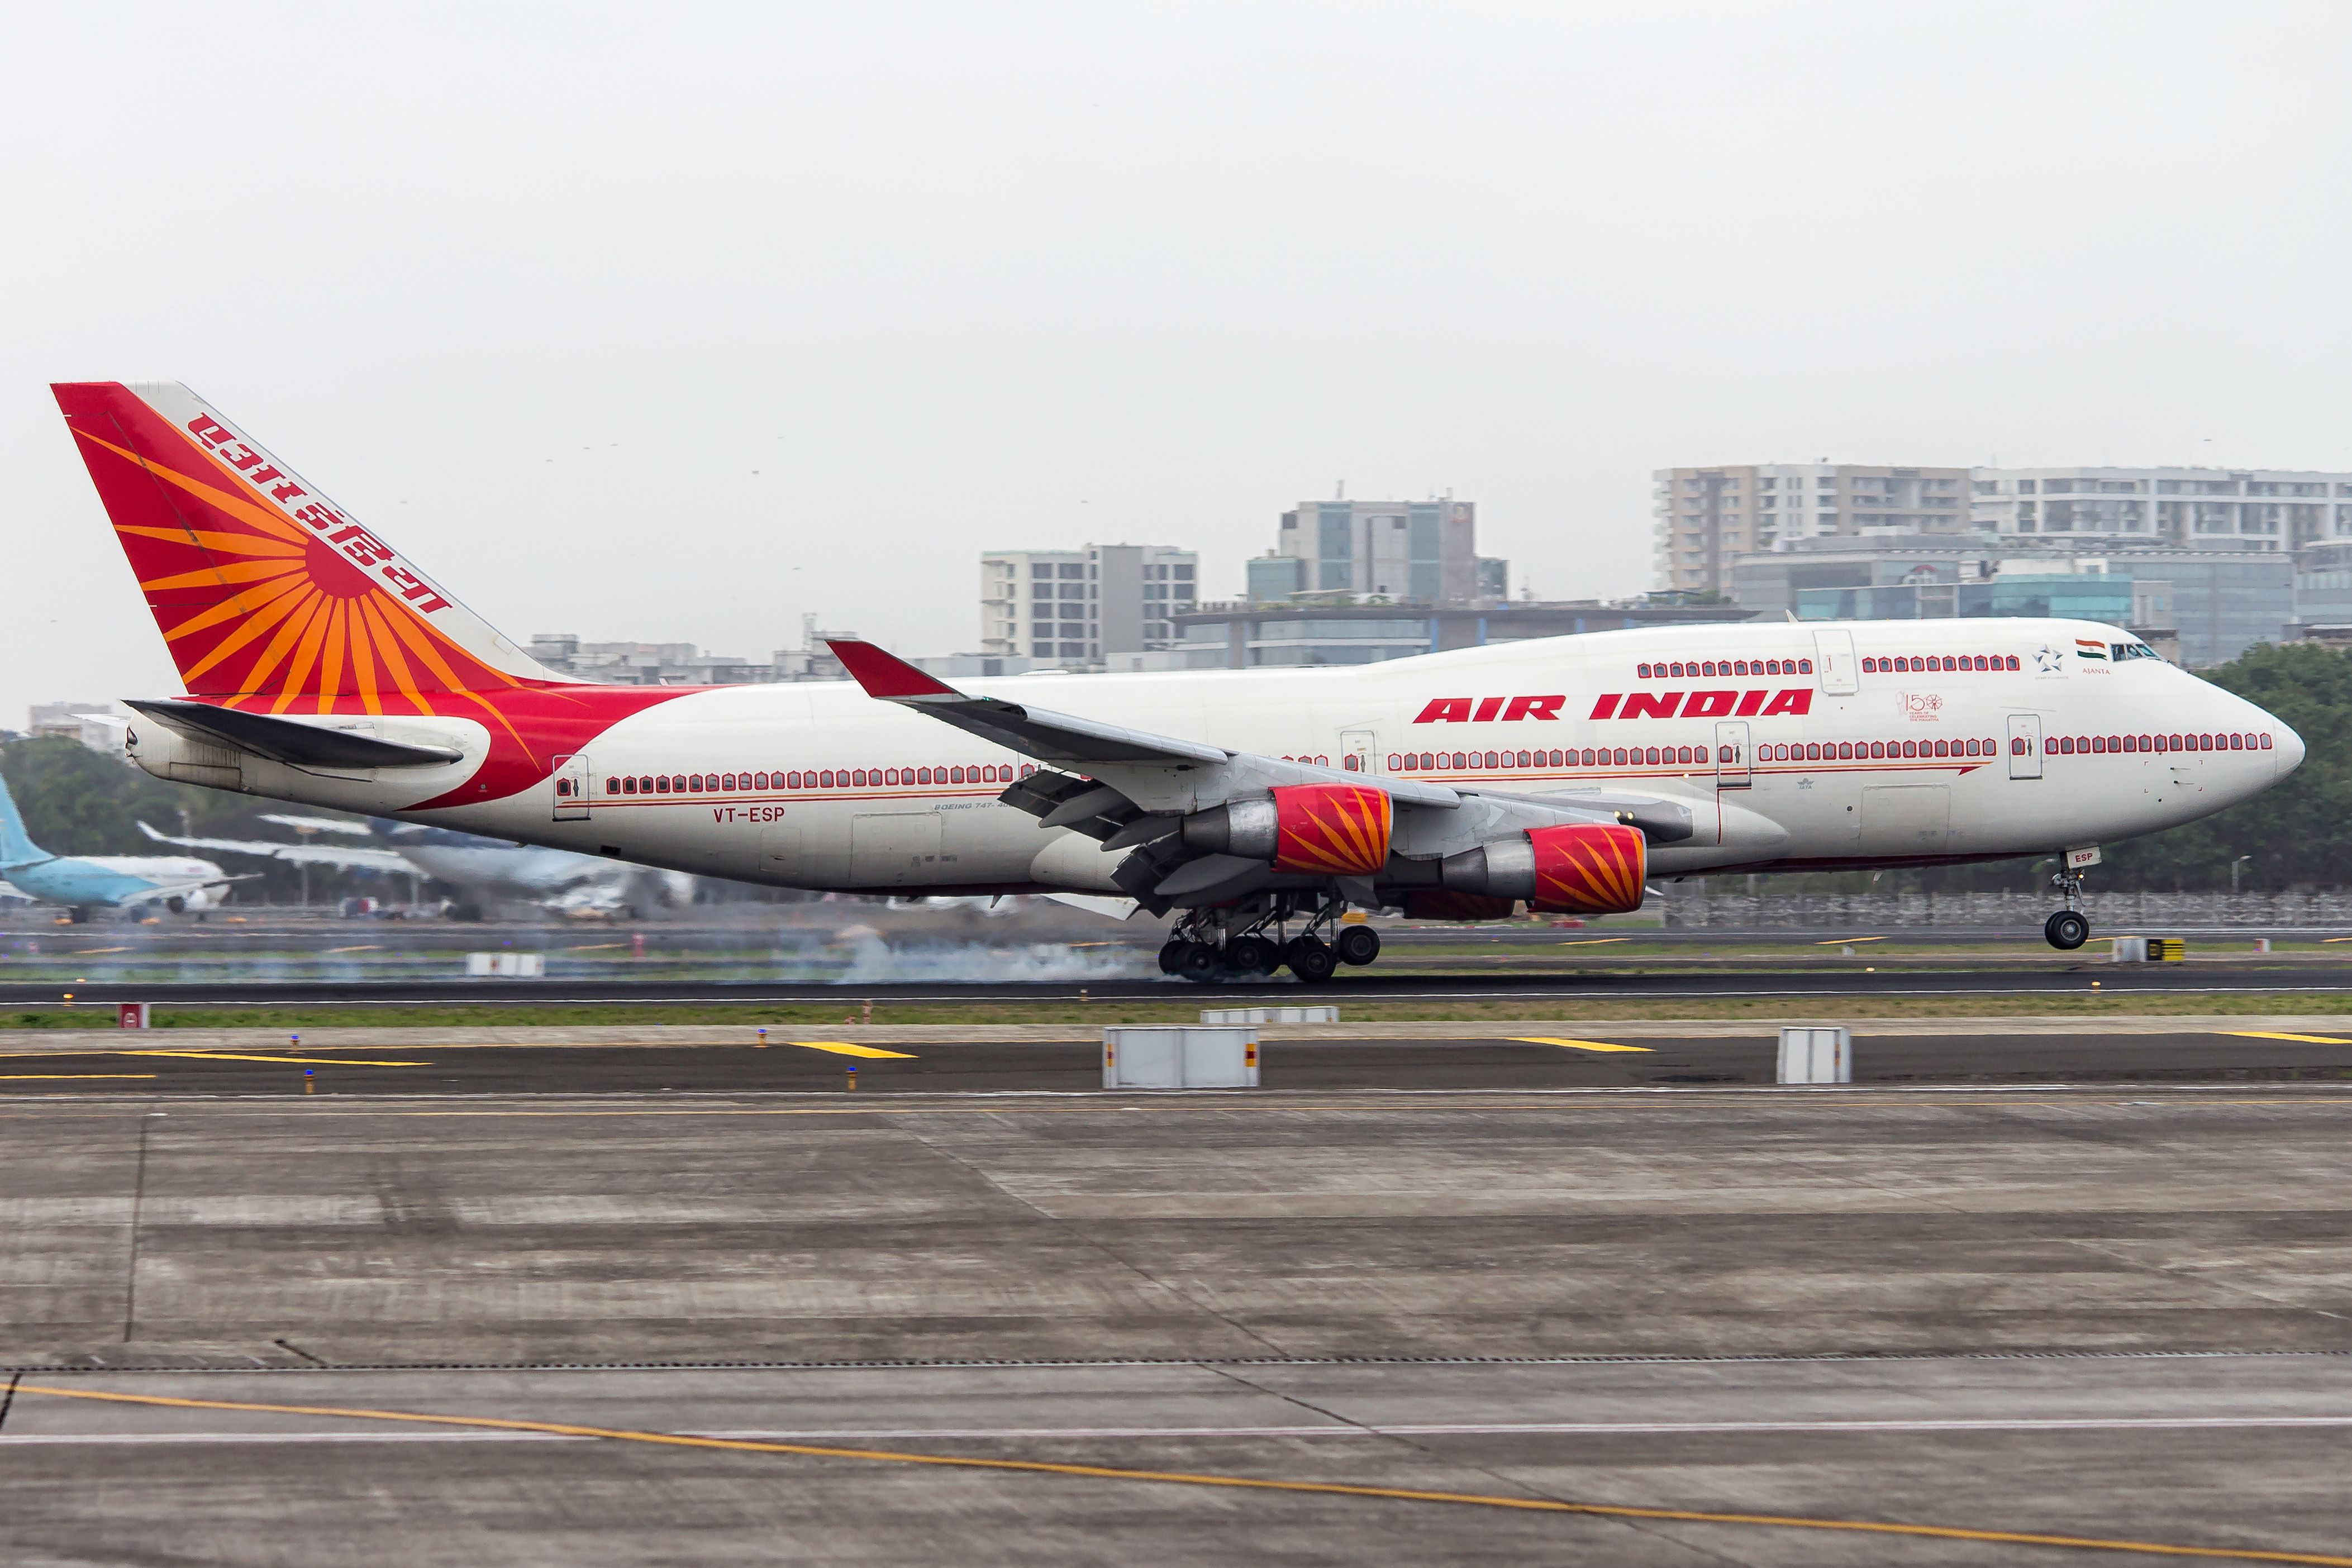 Air India's Boeing 747s: Where Are They Now?